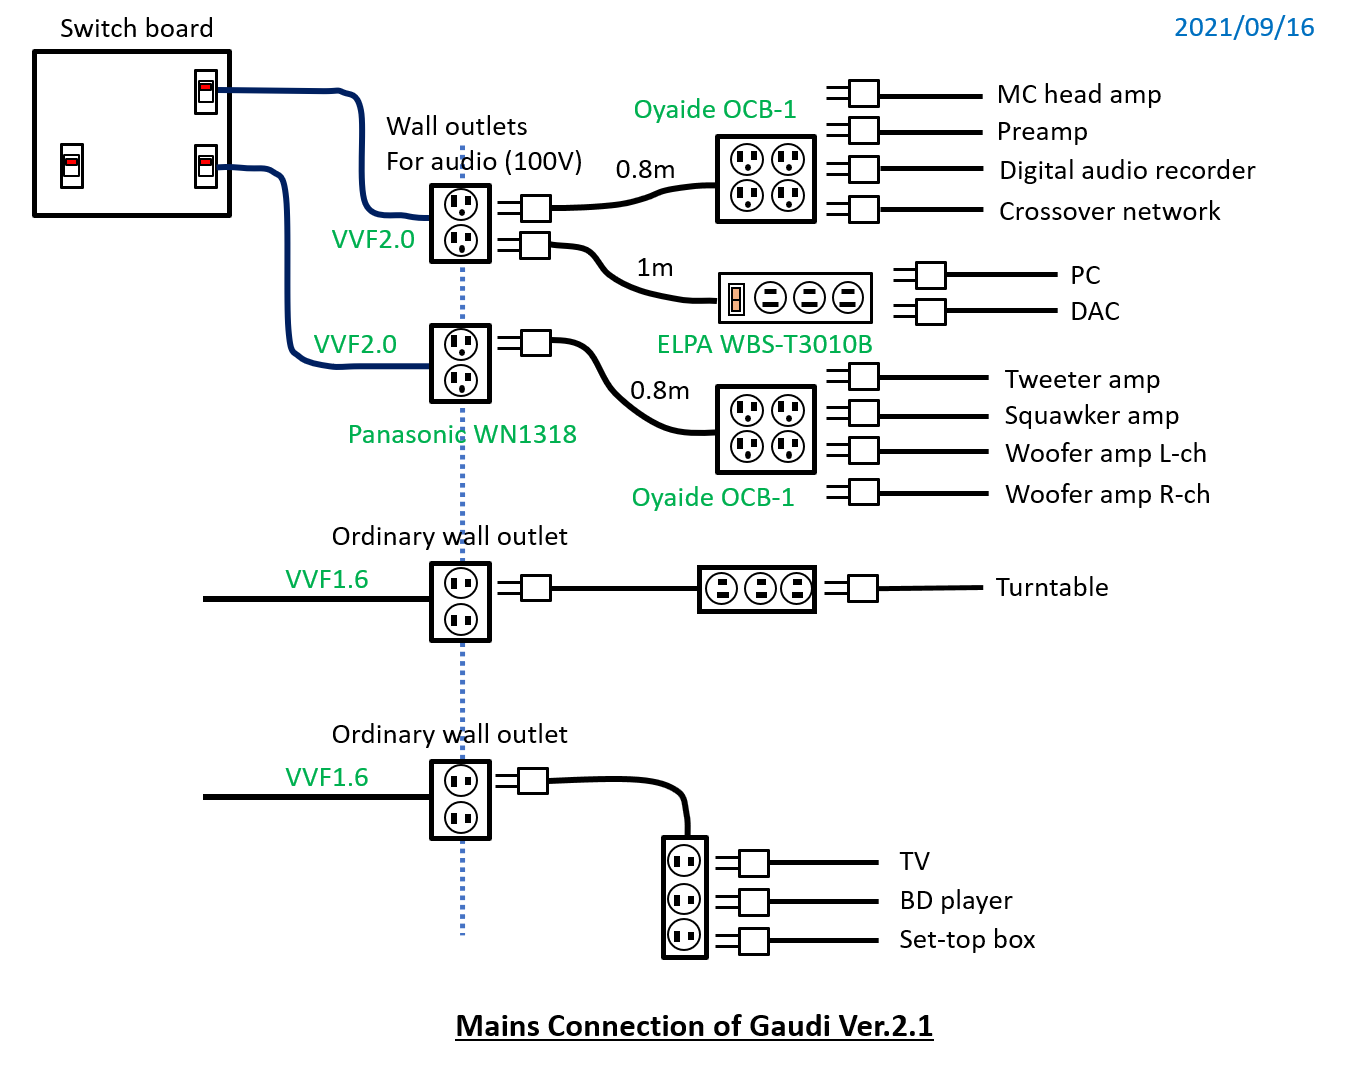 Mains Connection of Gaudi Ver. 2.1